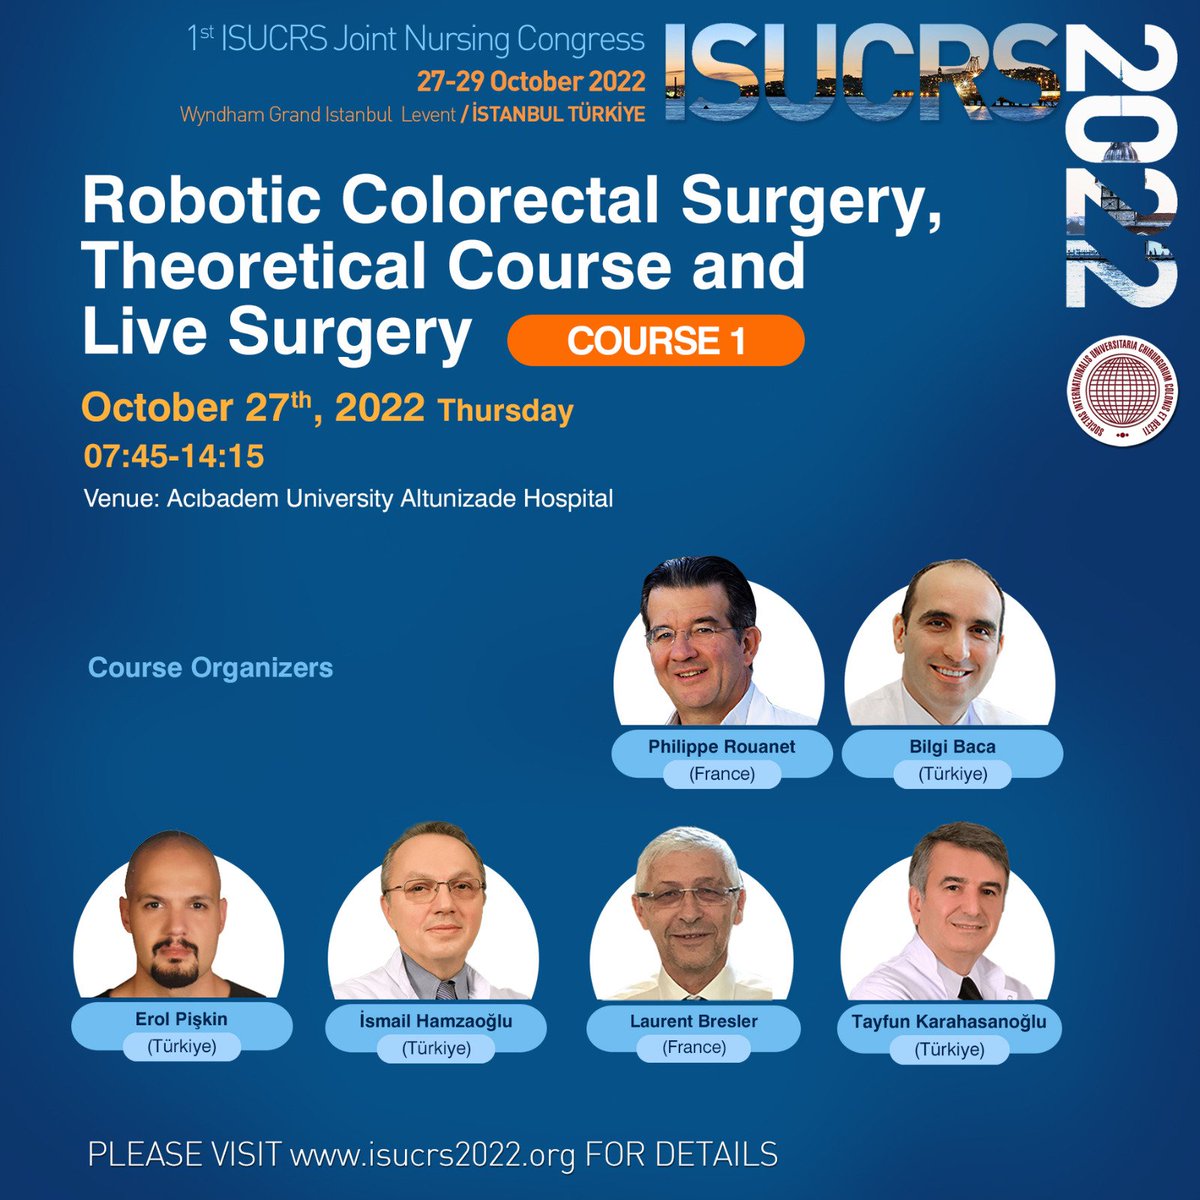 Robotic Colorectal Surgery, Theoretical Course and Live Surgery 🔺️27 October 2022 🔻Acibadem University Altunizade Hospital Visit isucrs2022.org for details #isucrs #isucrs2022 #isucrsistanbul